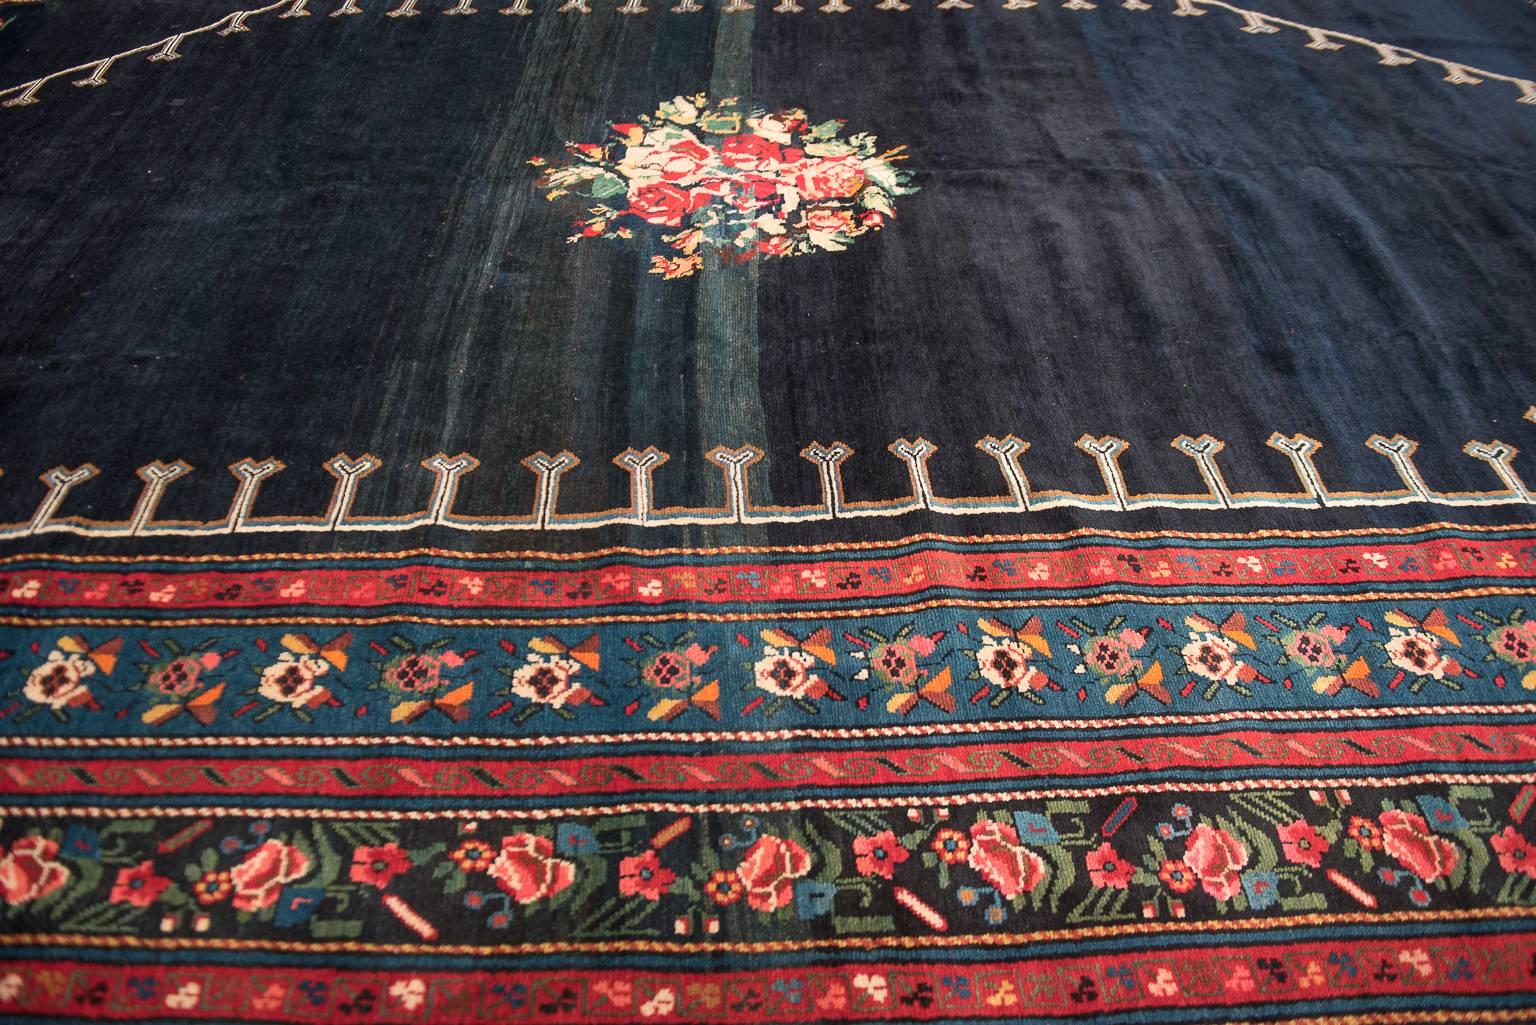 Regal blue antique Caucasian Karabagh carpet, circa 1900.
The weavers of the Causcasas Mountain Range were nestled away from the global and historical influences of the Persian rug trade  Antique Karabagh carpets tend to feature floral designs upon